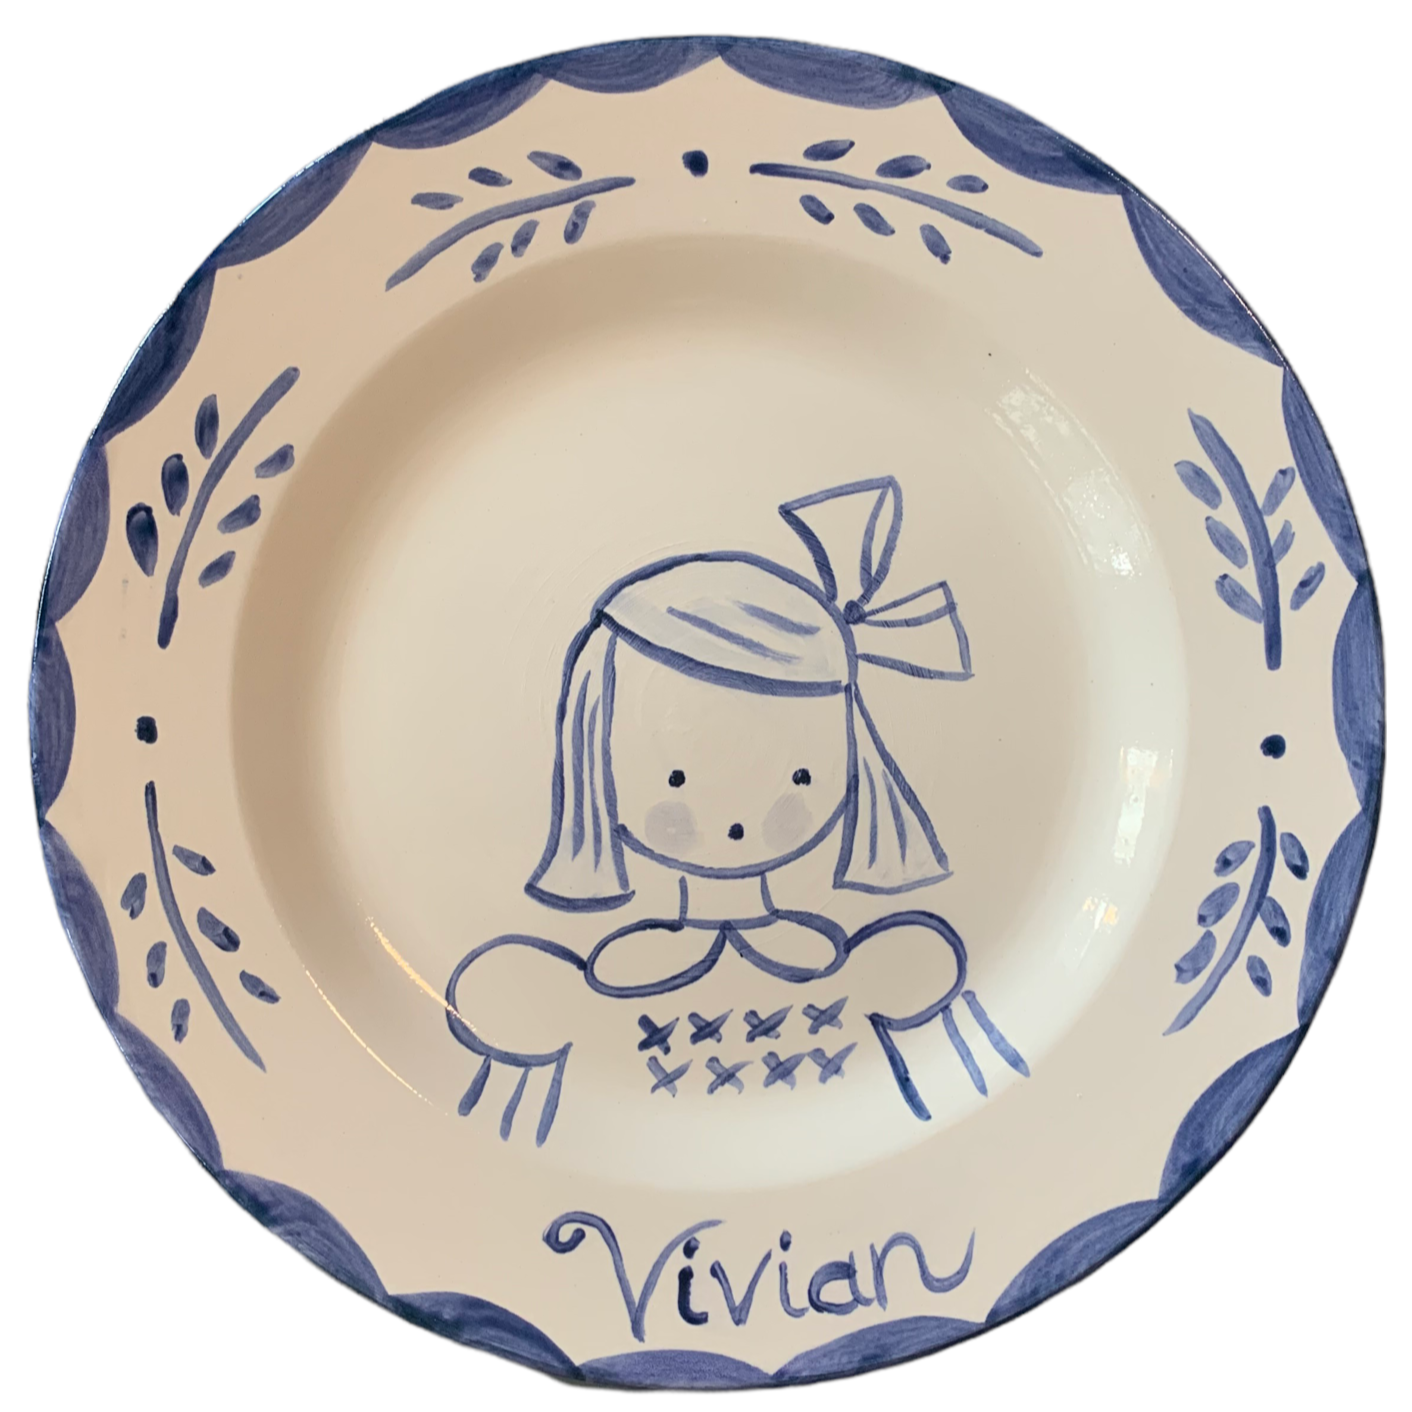 Simple Girl's Plate (blue and white) - Premium  from Tricia Lowenfield Design 